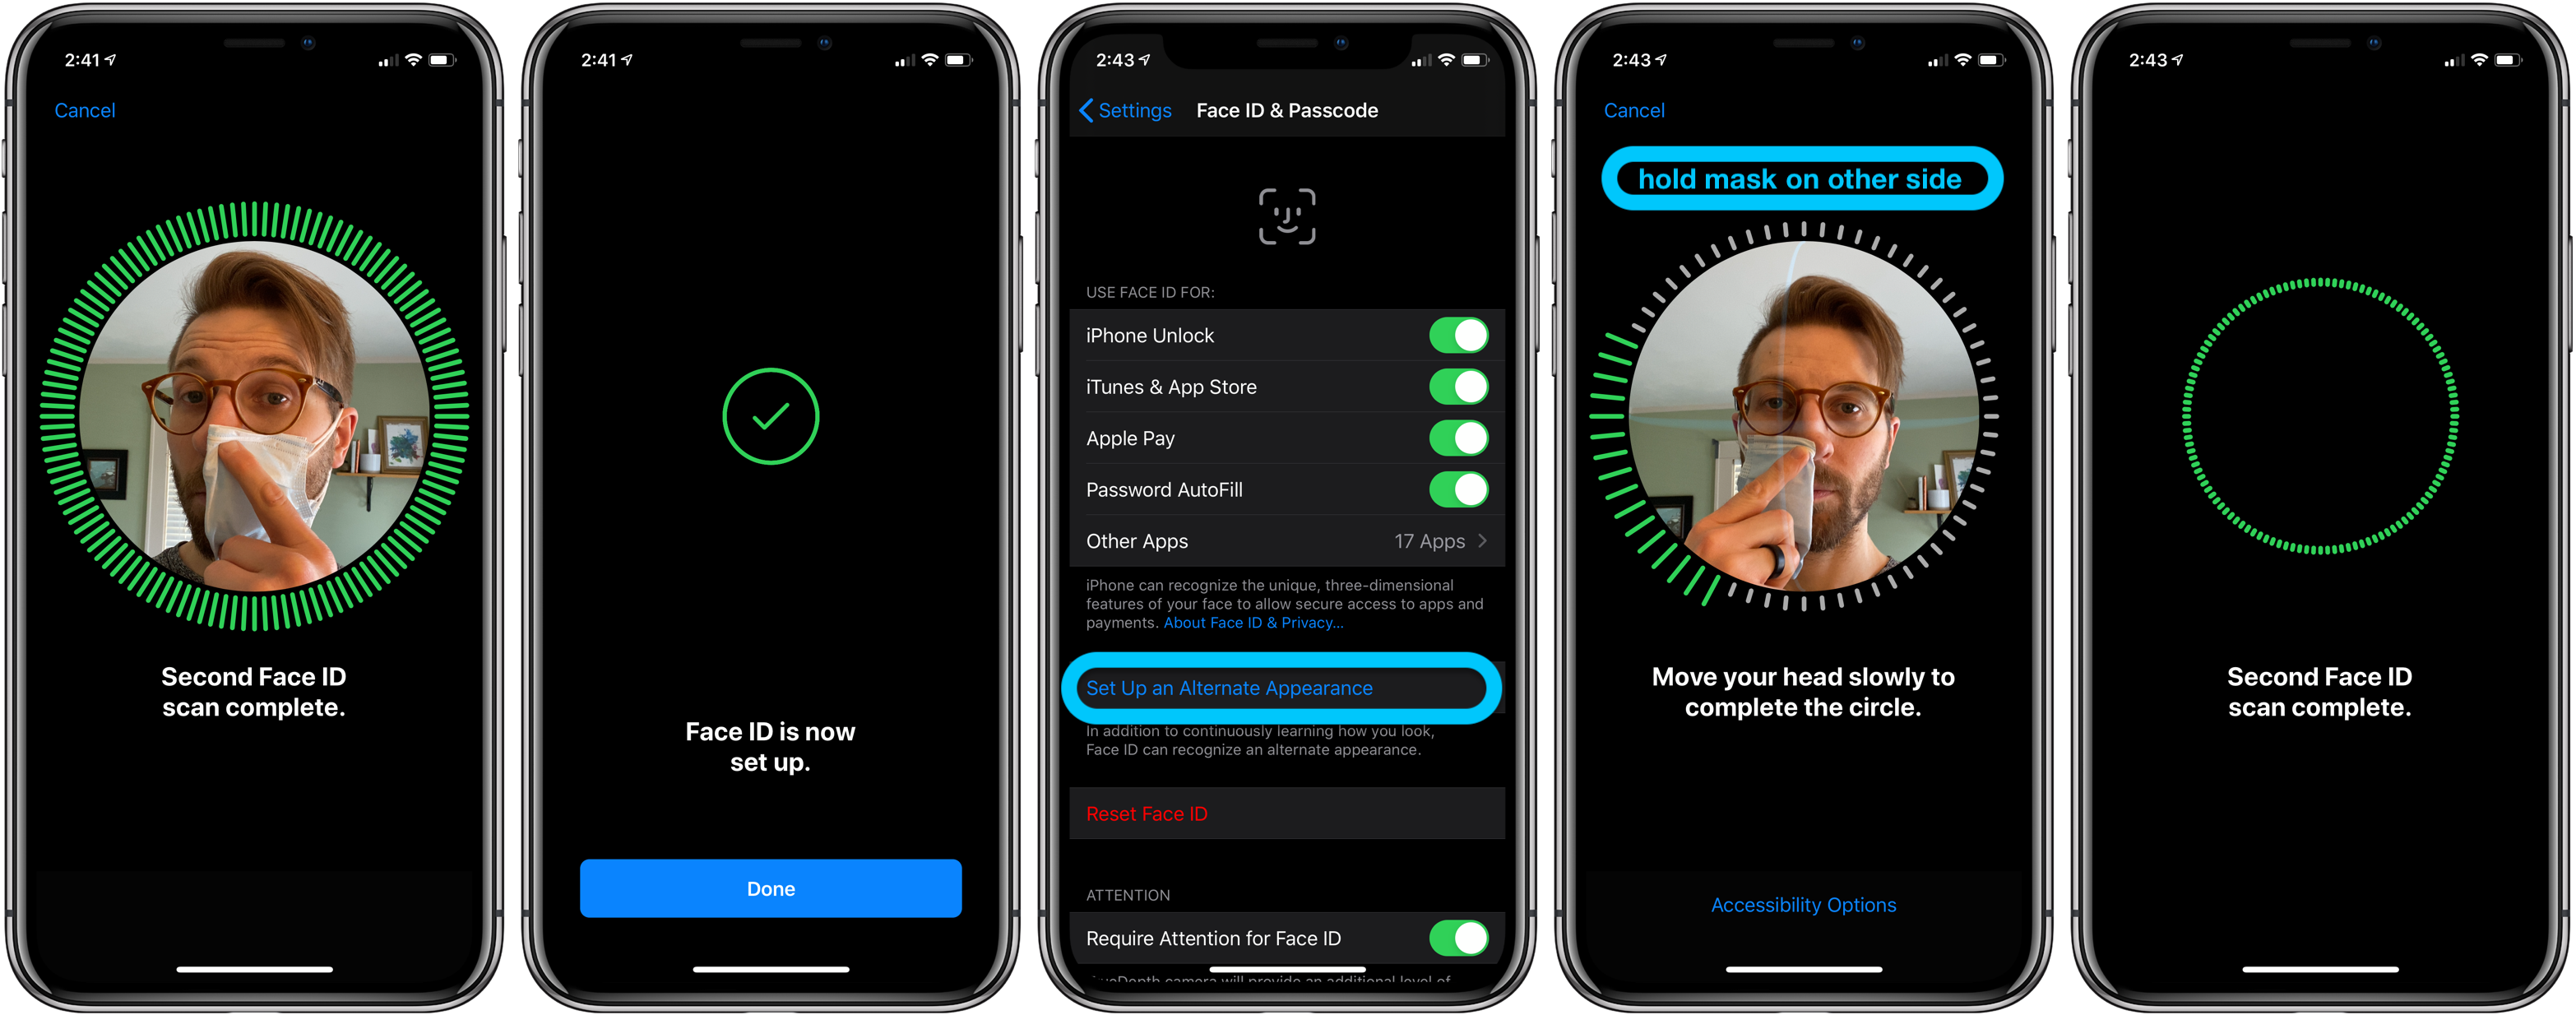 iPhone how to use Face ID with mask walkthrough 2